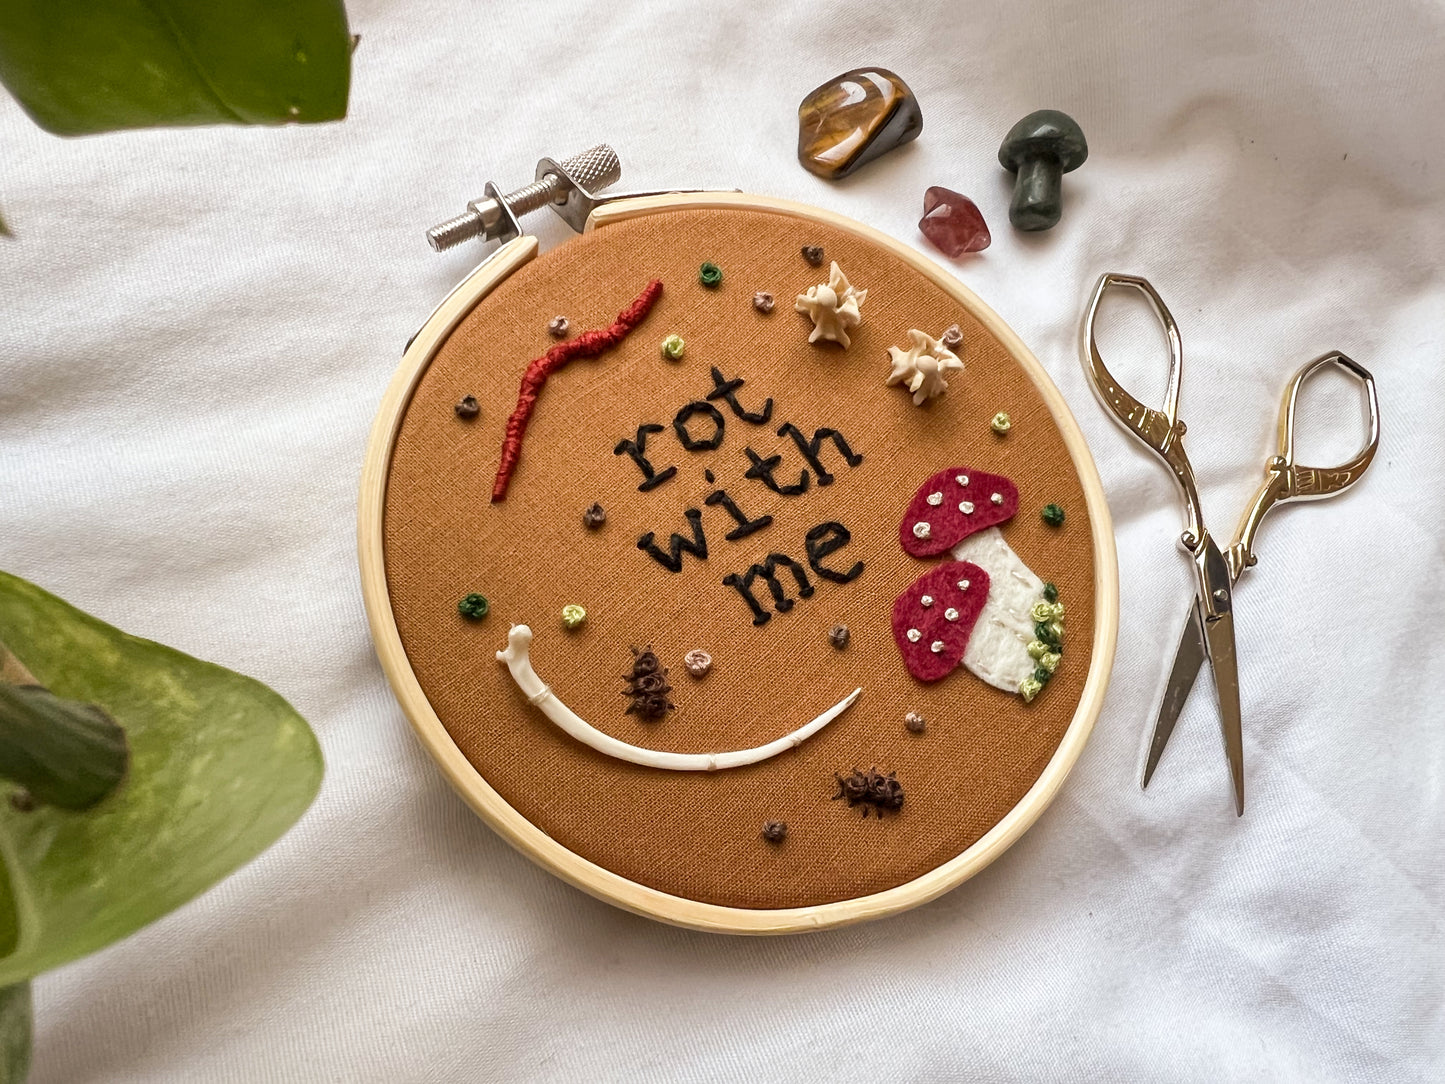 rot with me embroidery